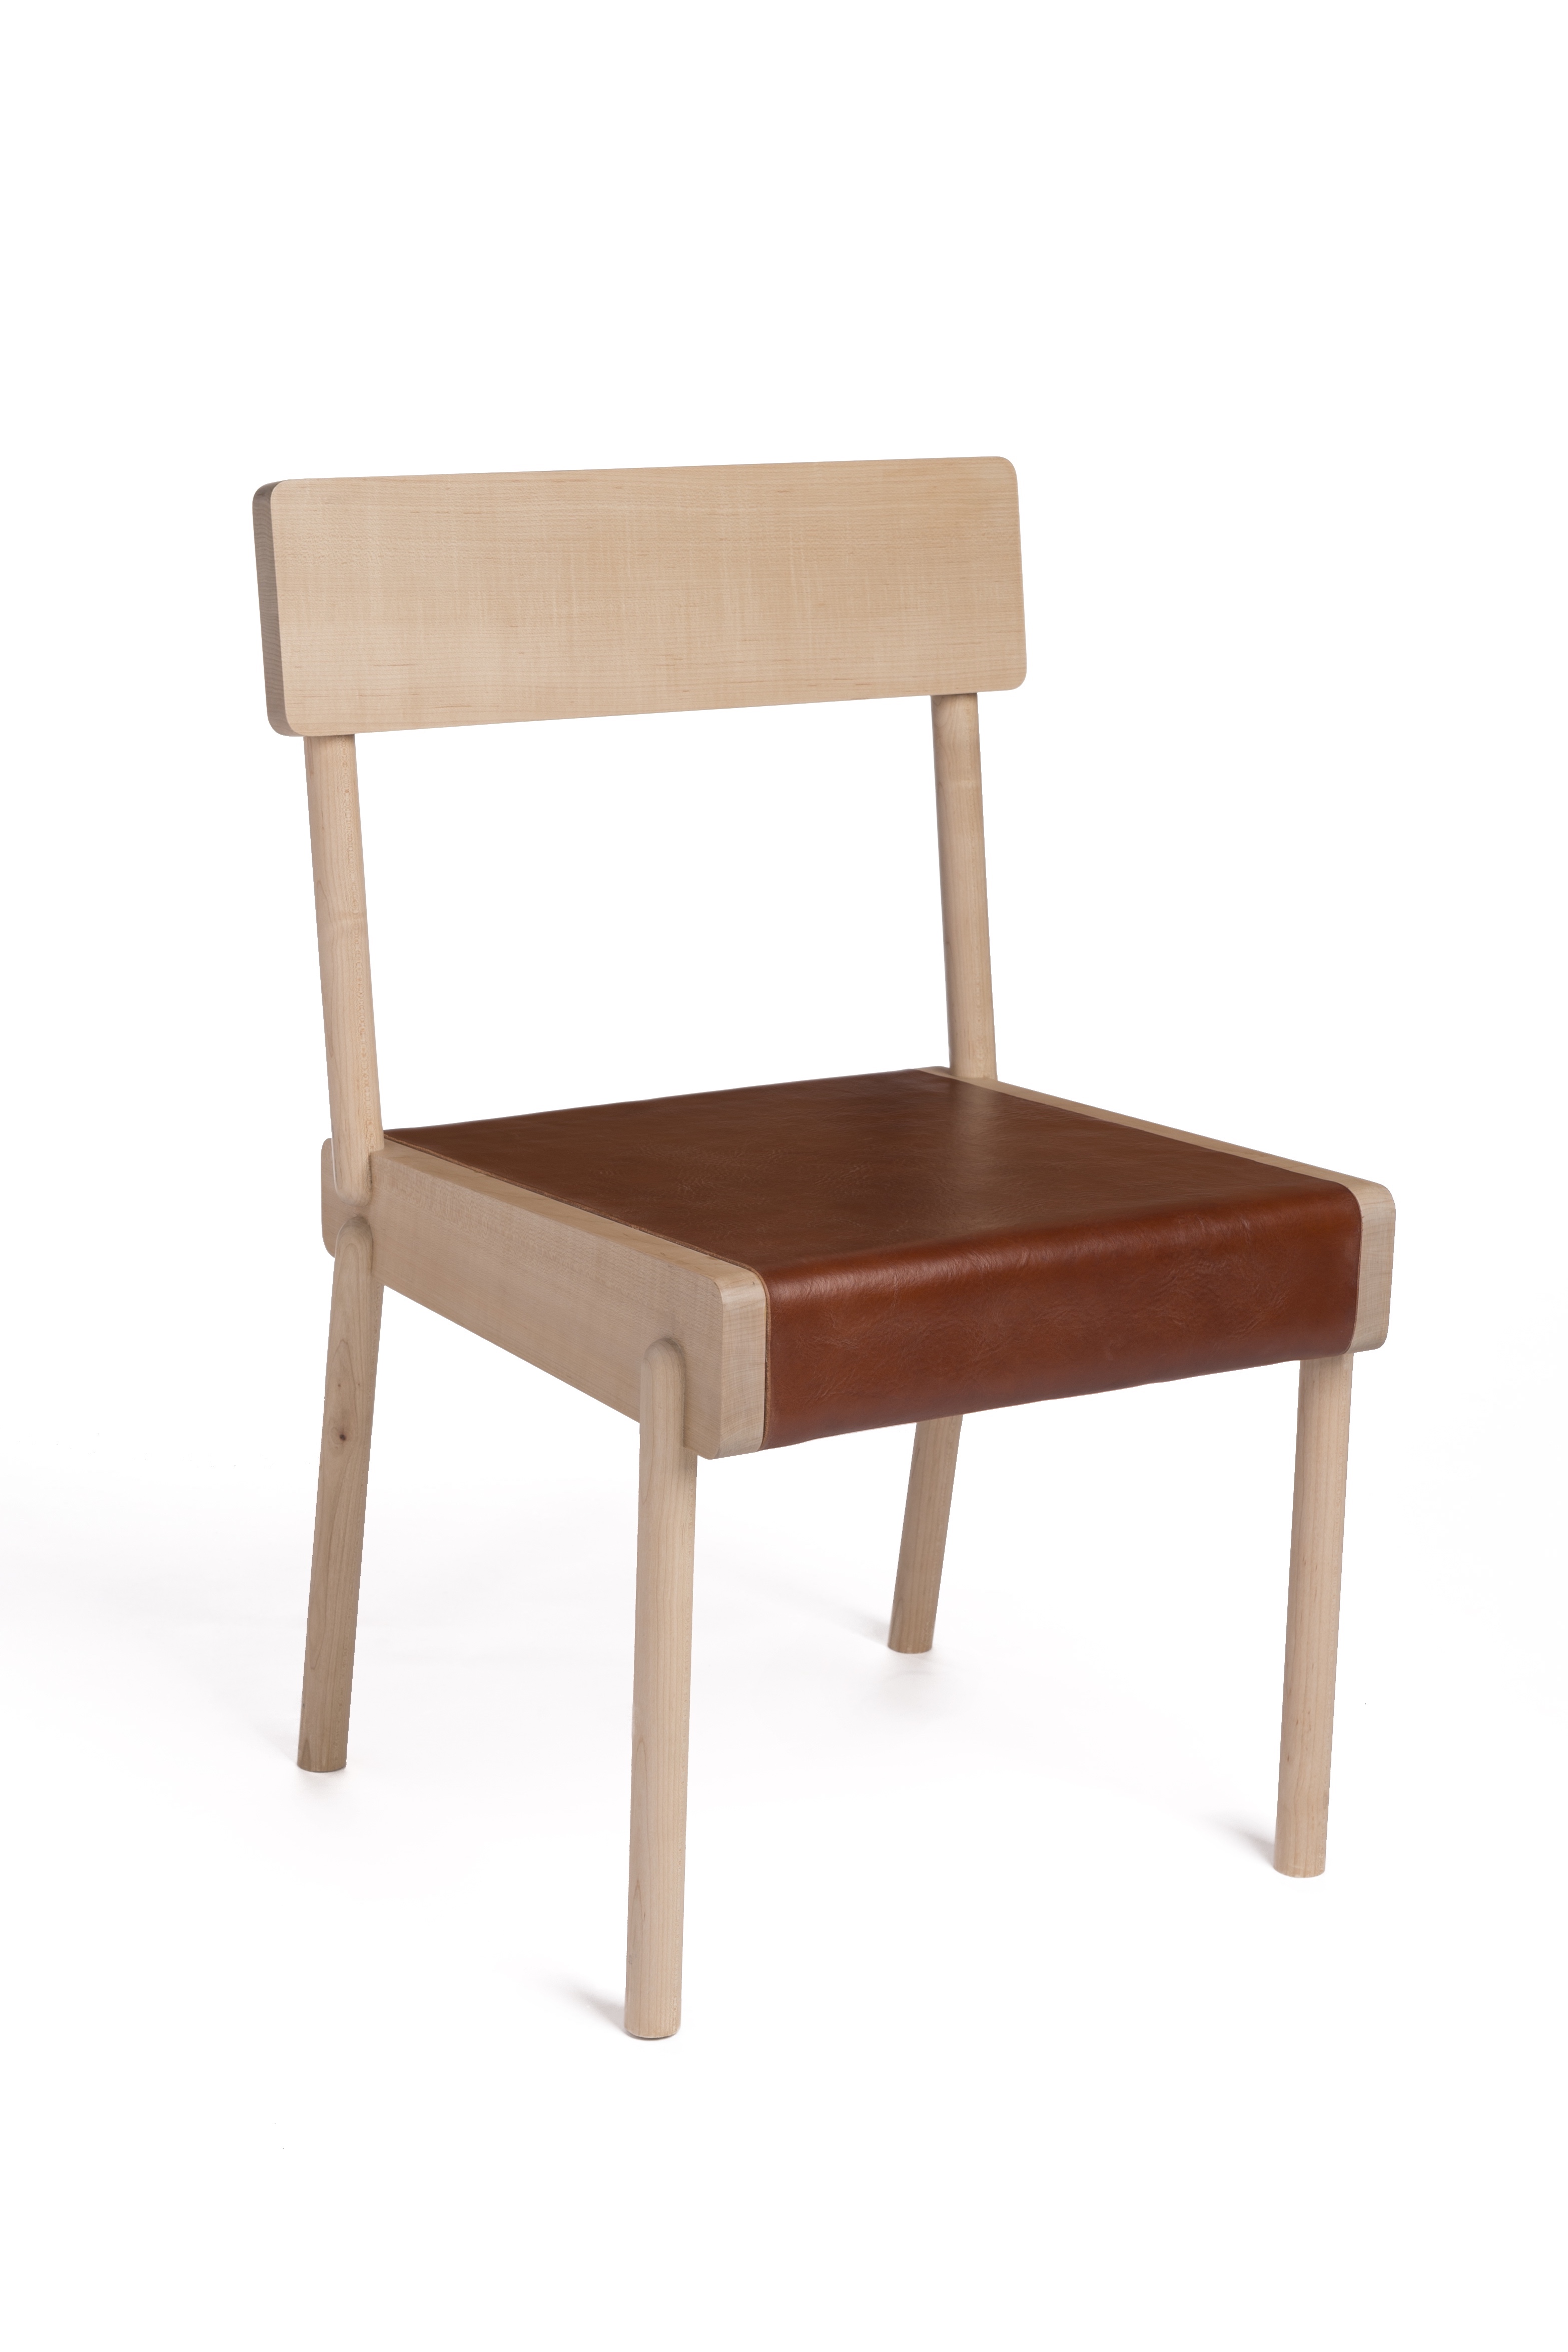 A student-designed chair